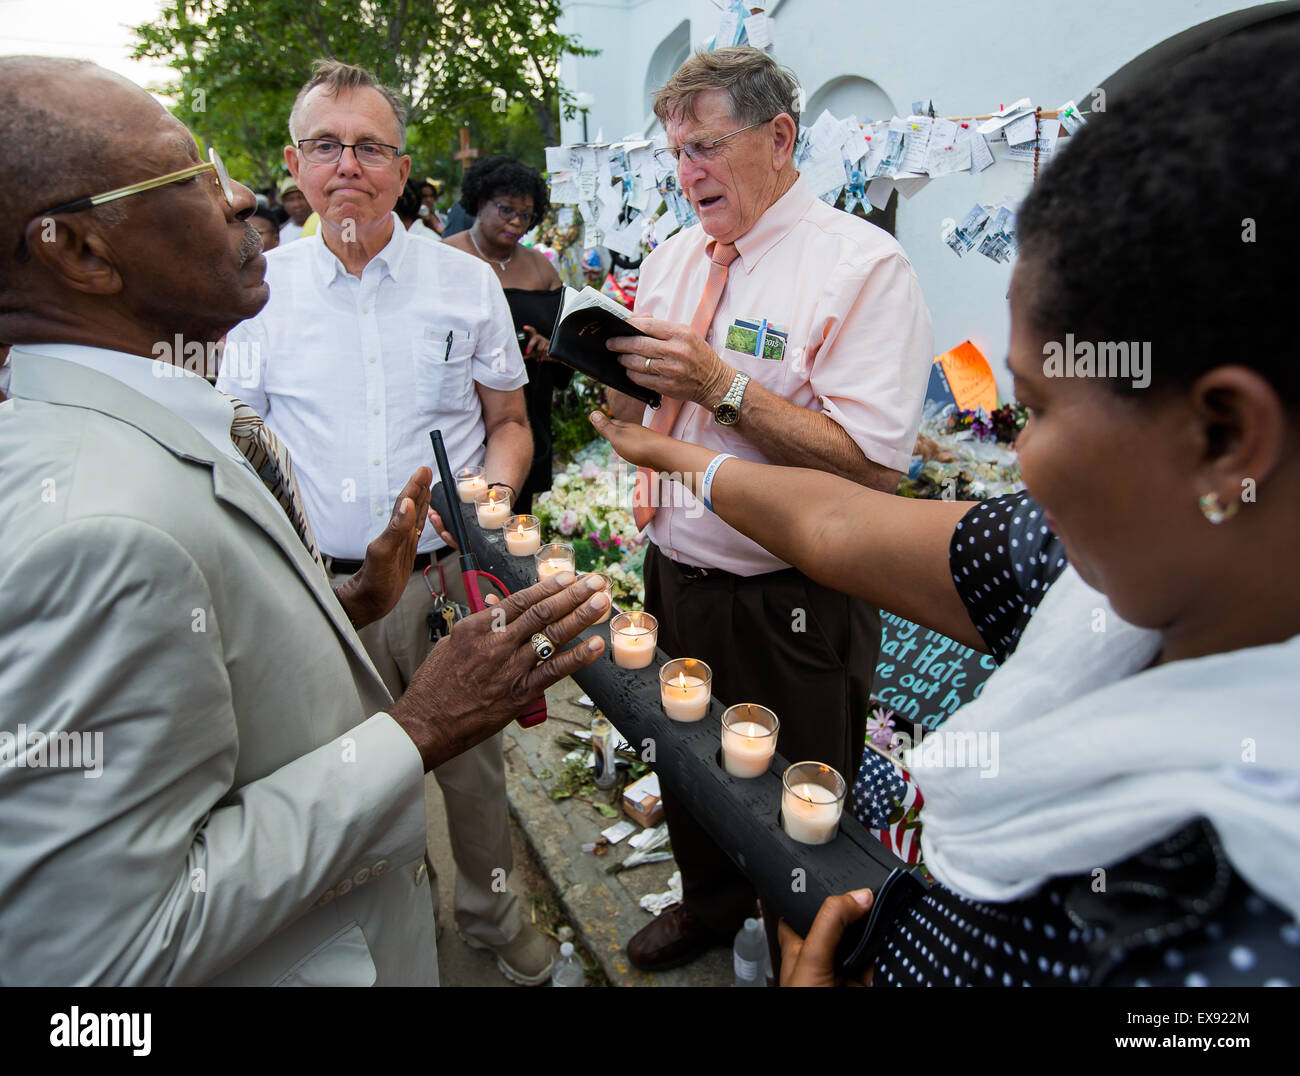 Memorial service in front of Emanuel AME Church after the shooting that took nine lives. Stock Photo